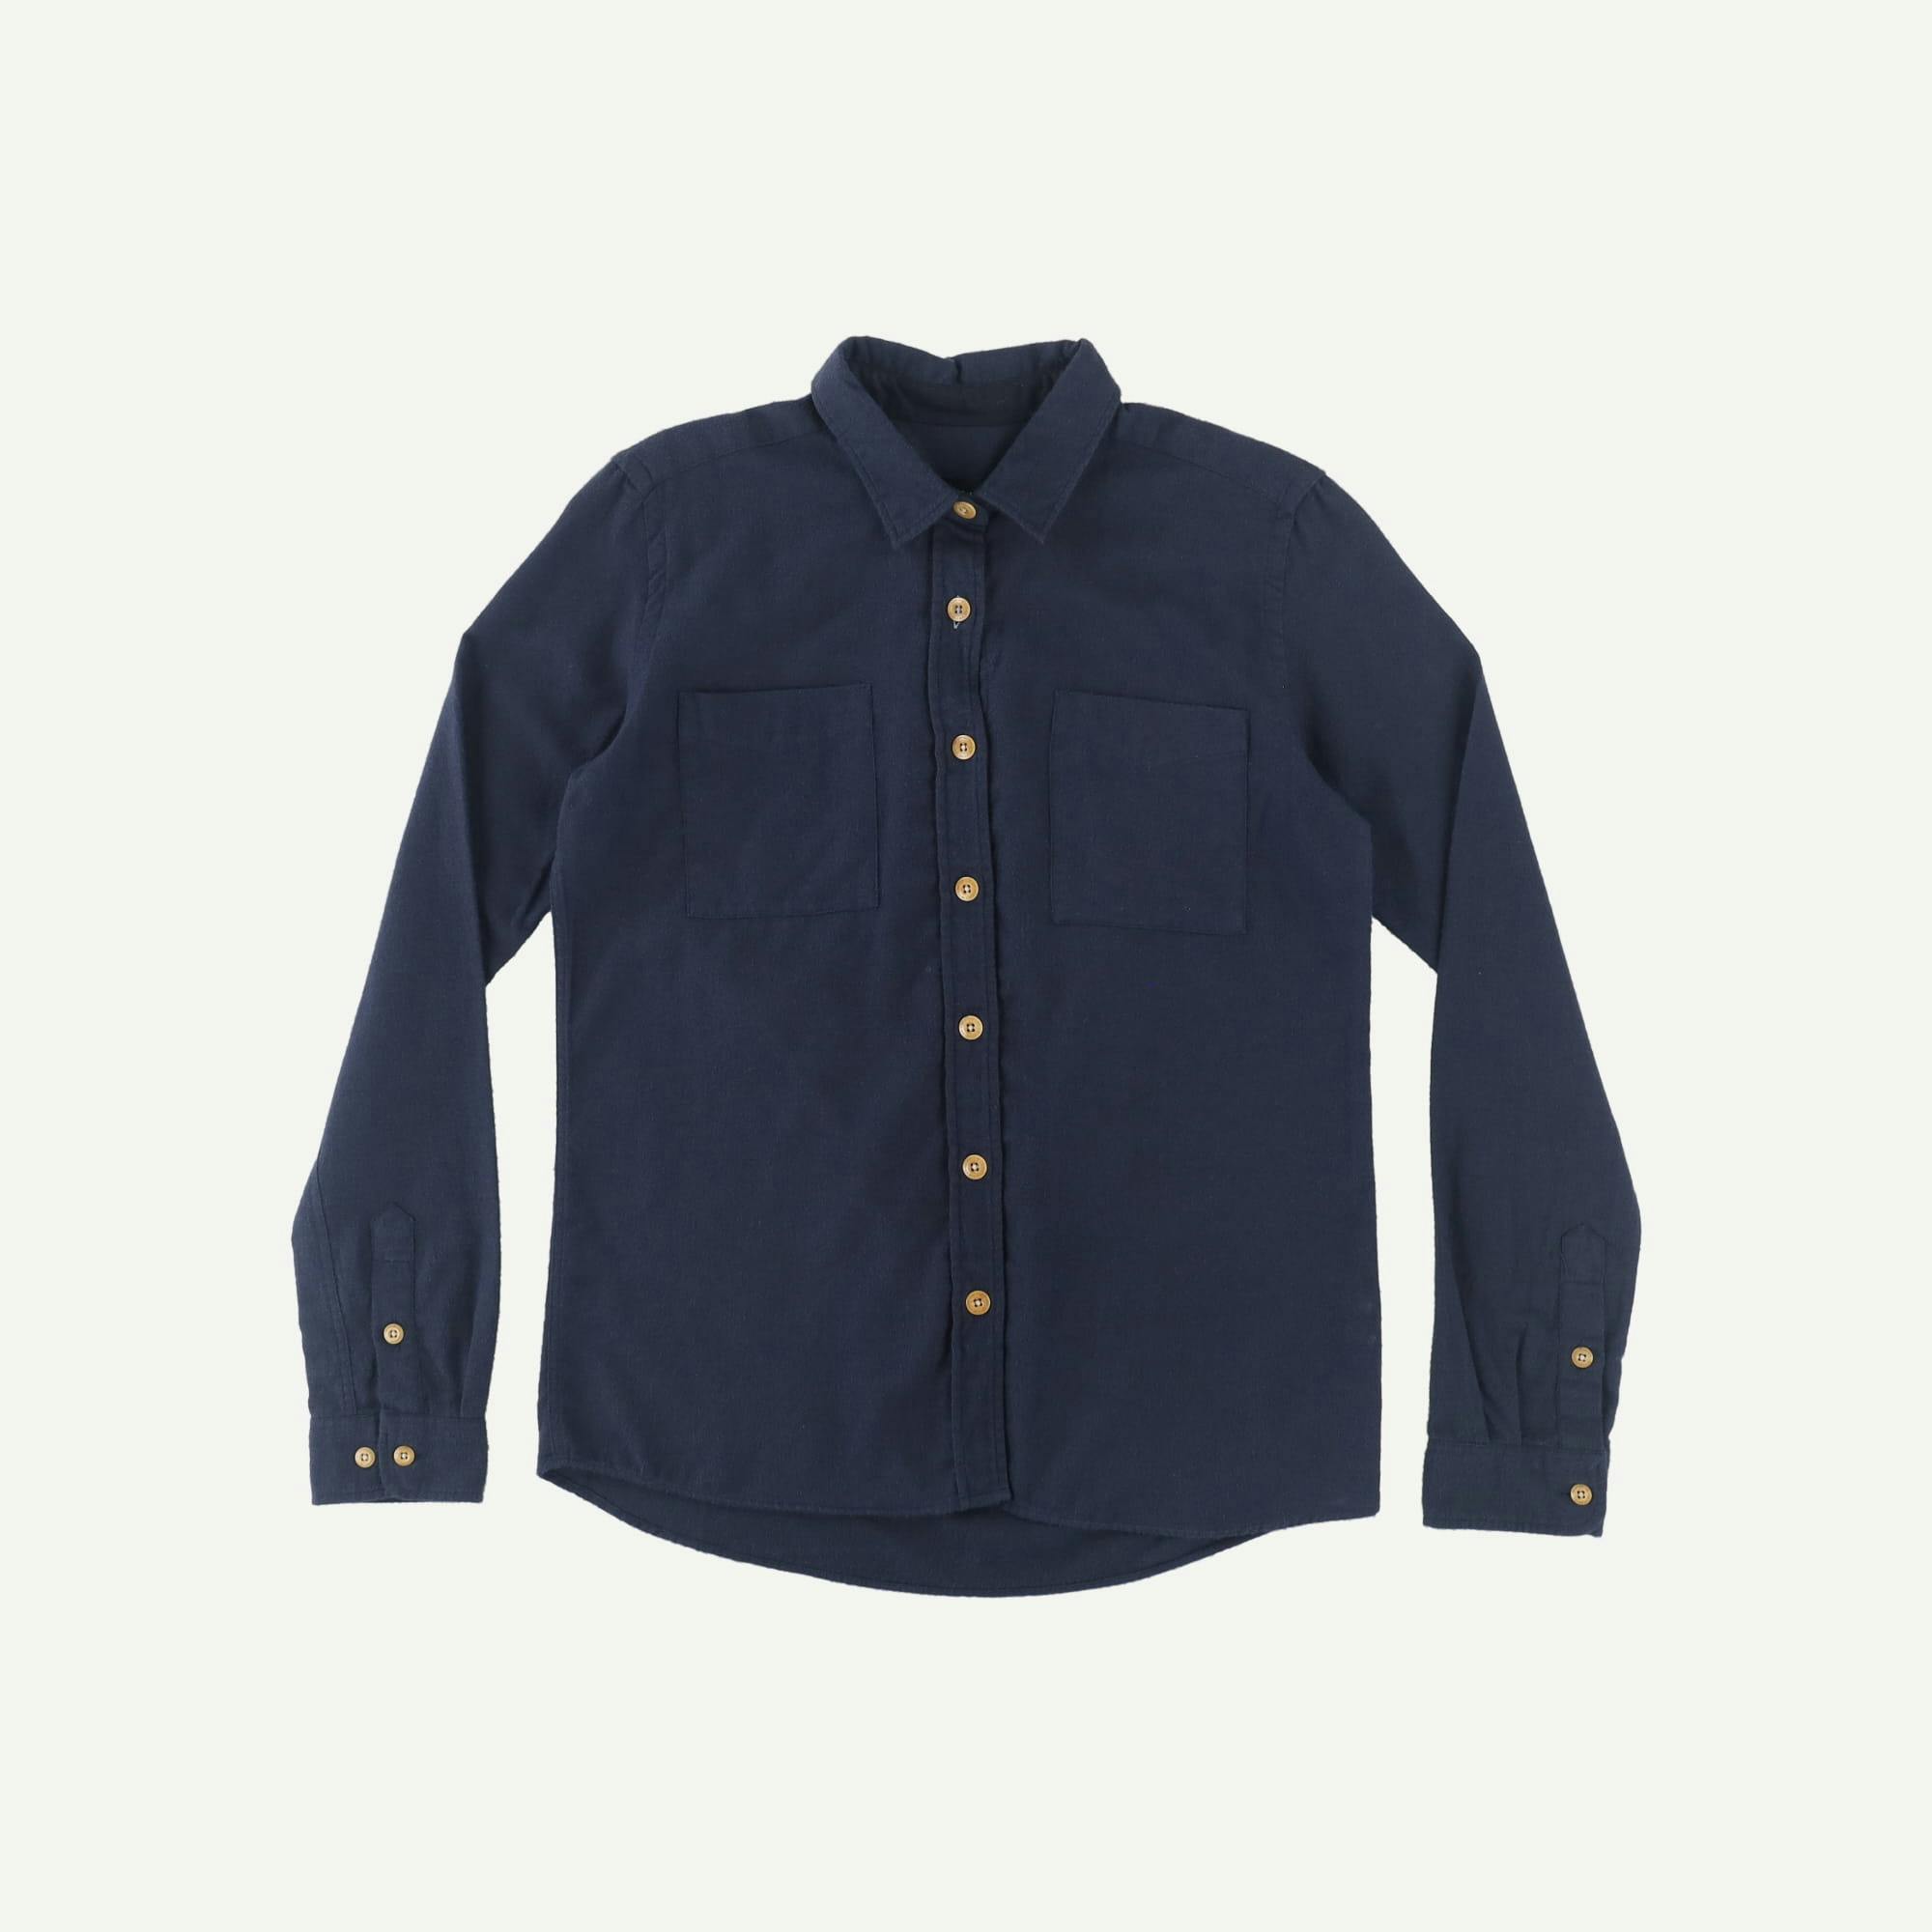 Finisterre As new Navy Lantic Shirt